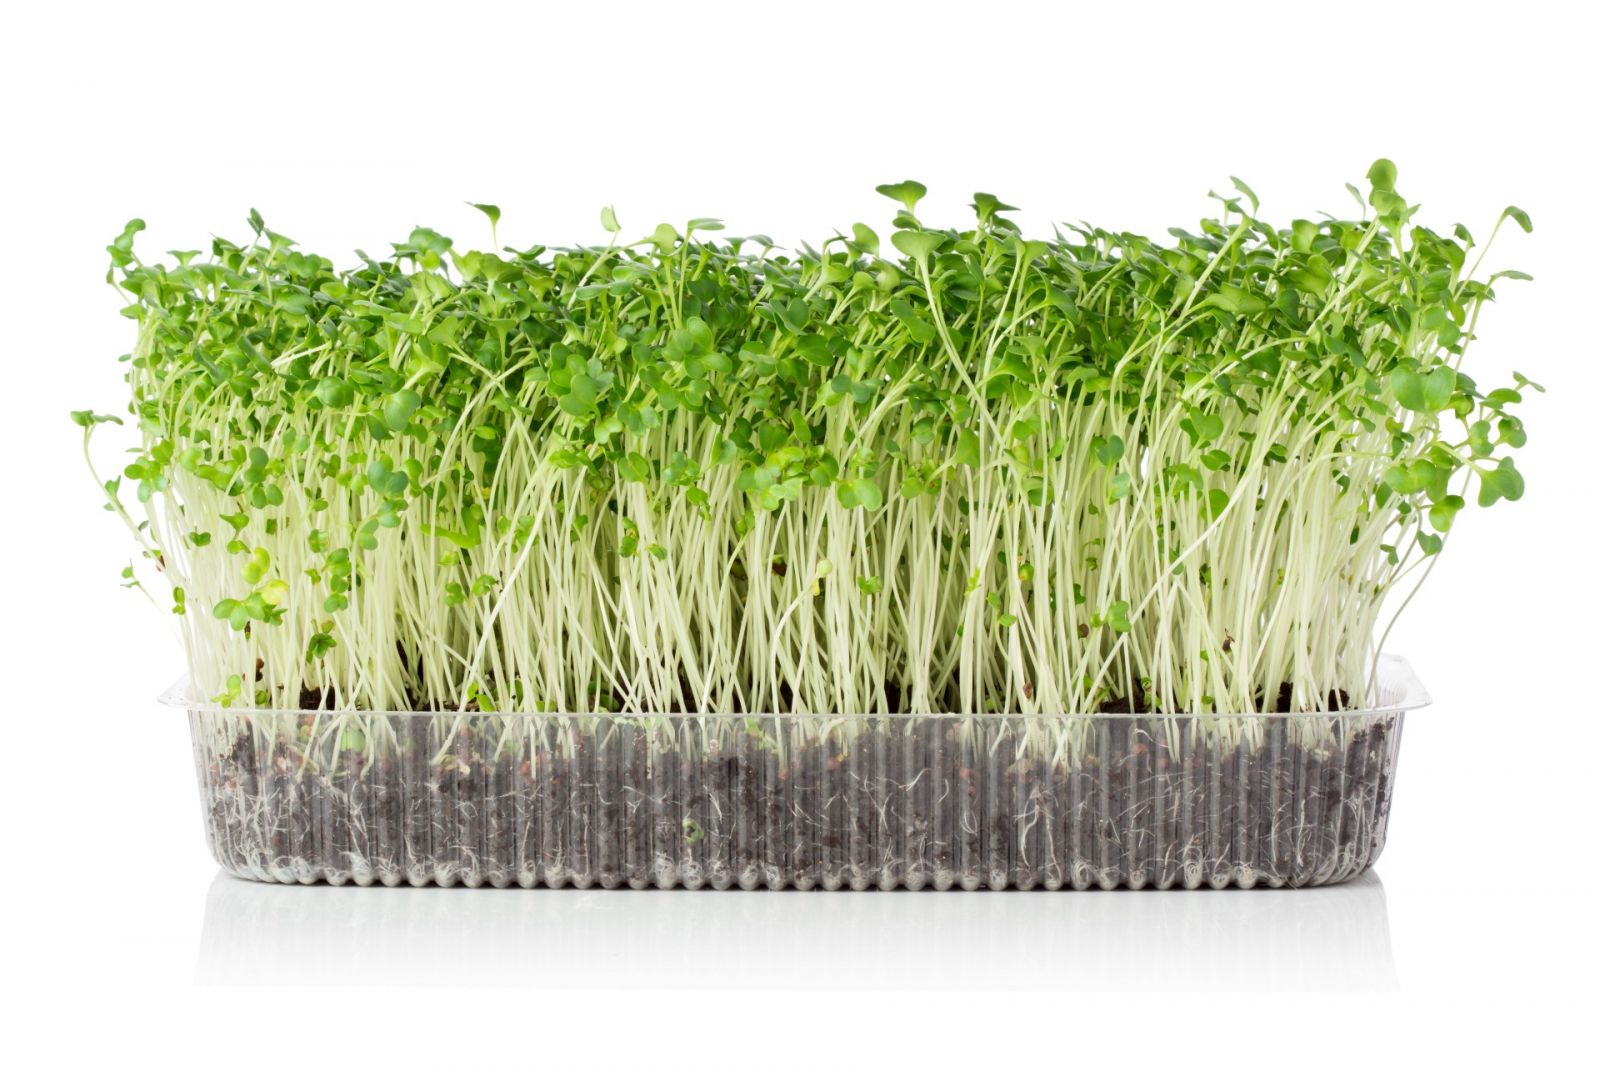 Columbia urban farm City Roots, which grows microgreens like the ones pictured above, is investing $4.4 million to expand its Richland County operations. (Photo/File)